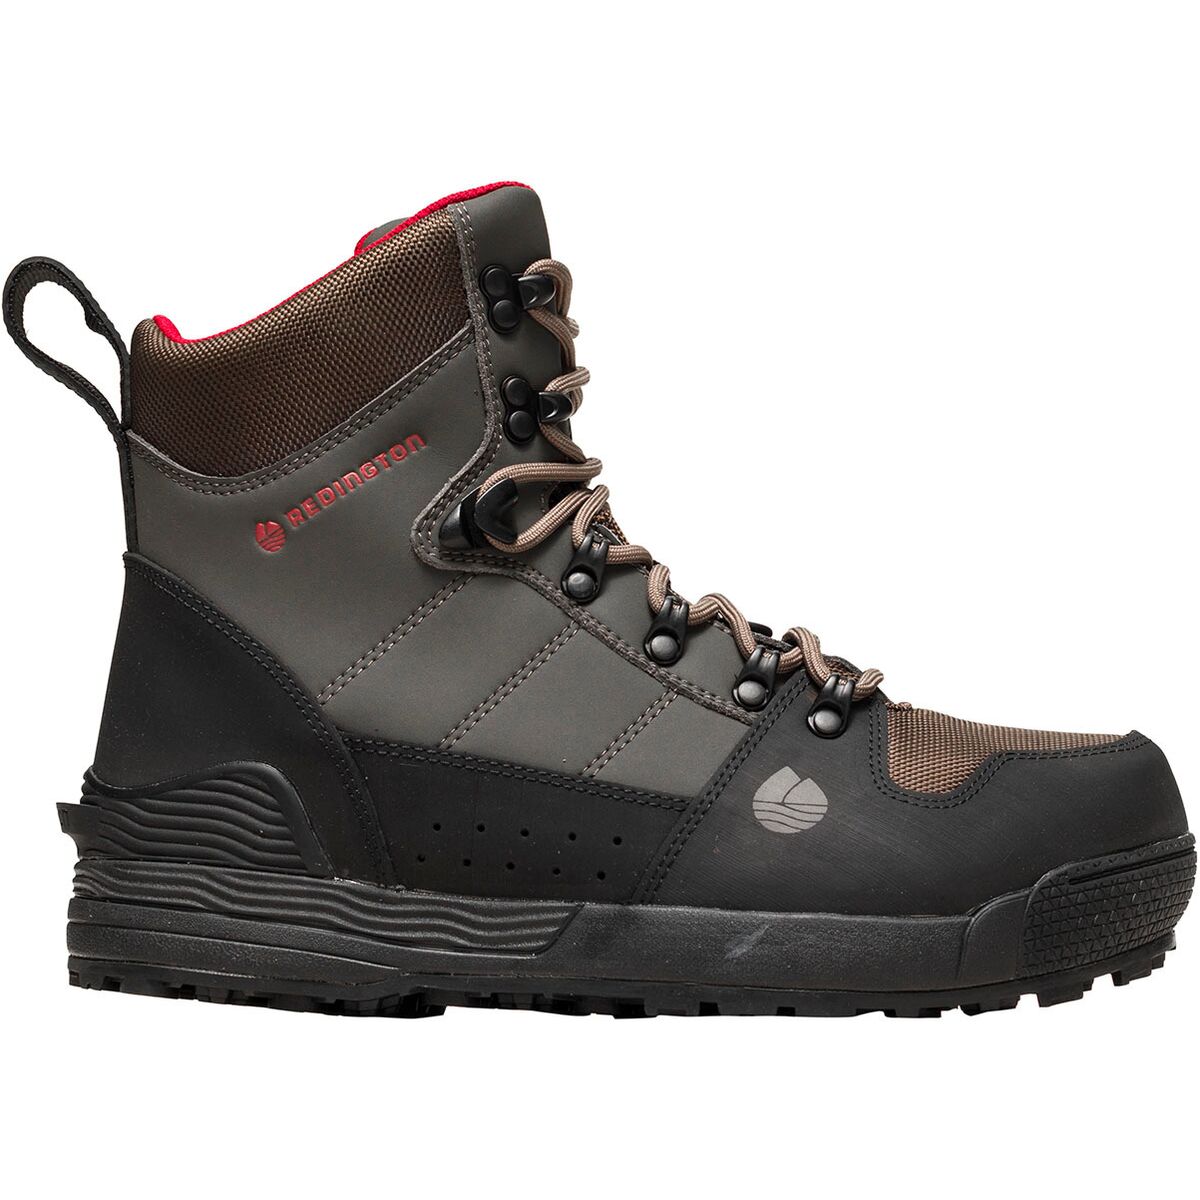 Redington Prowler Pro Sticky Rubber Wading Boot - Fishing